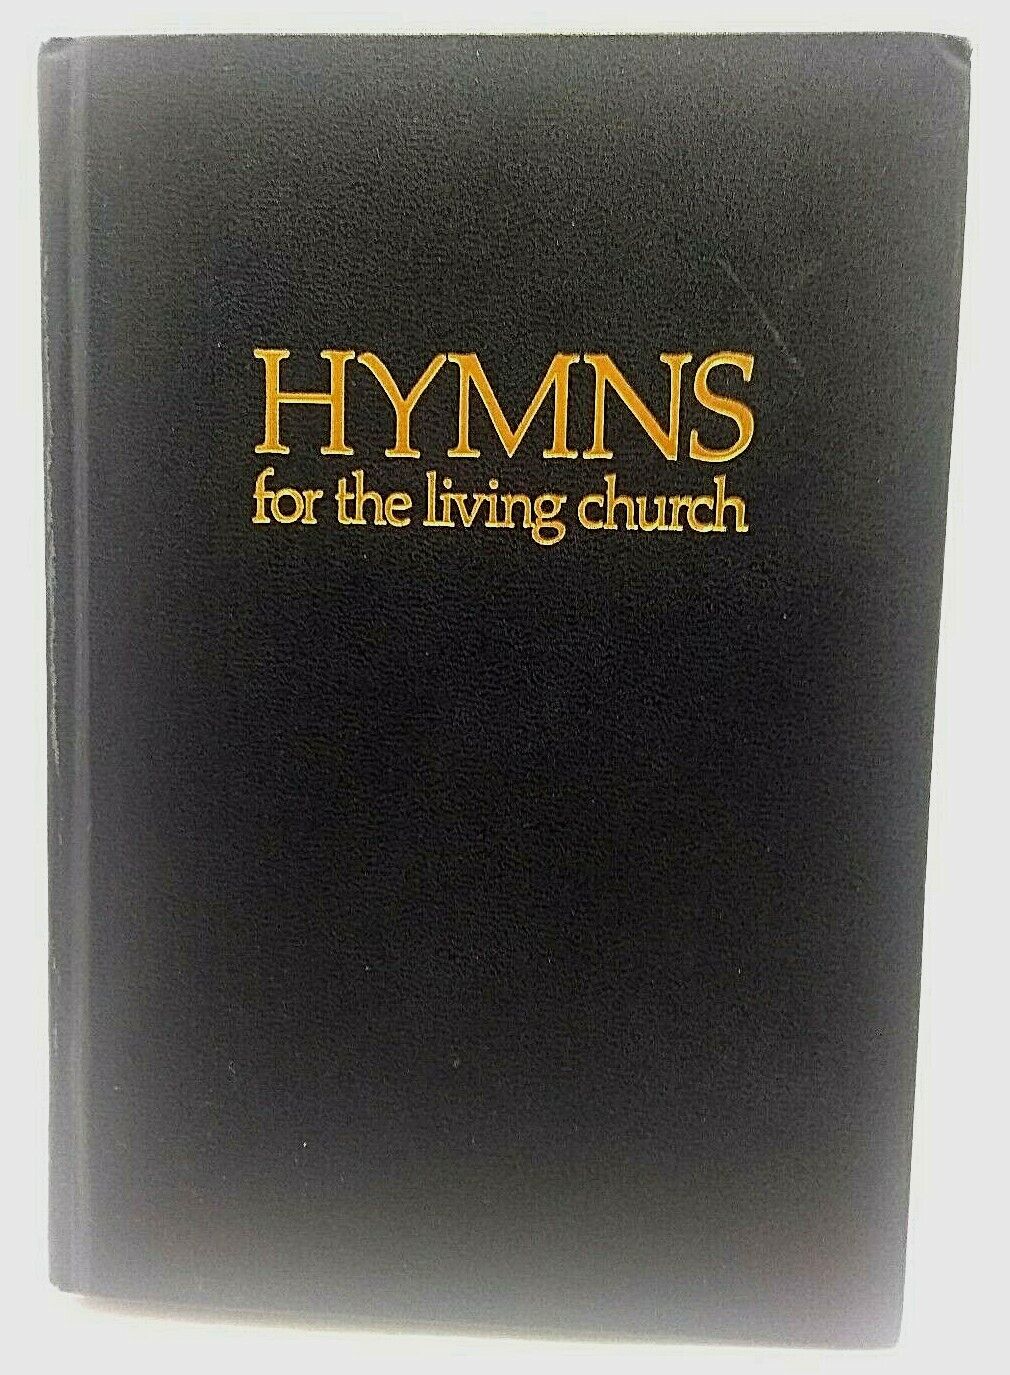 Hymns for the Living Church 1991 Hope Publishing Co HC Very Good Condition